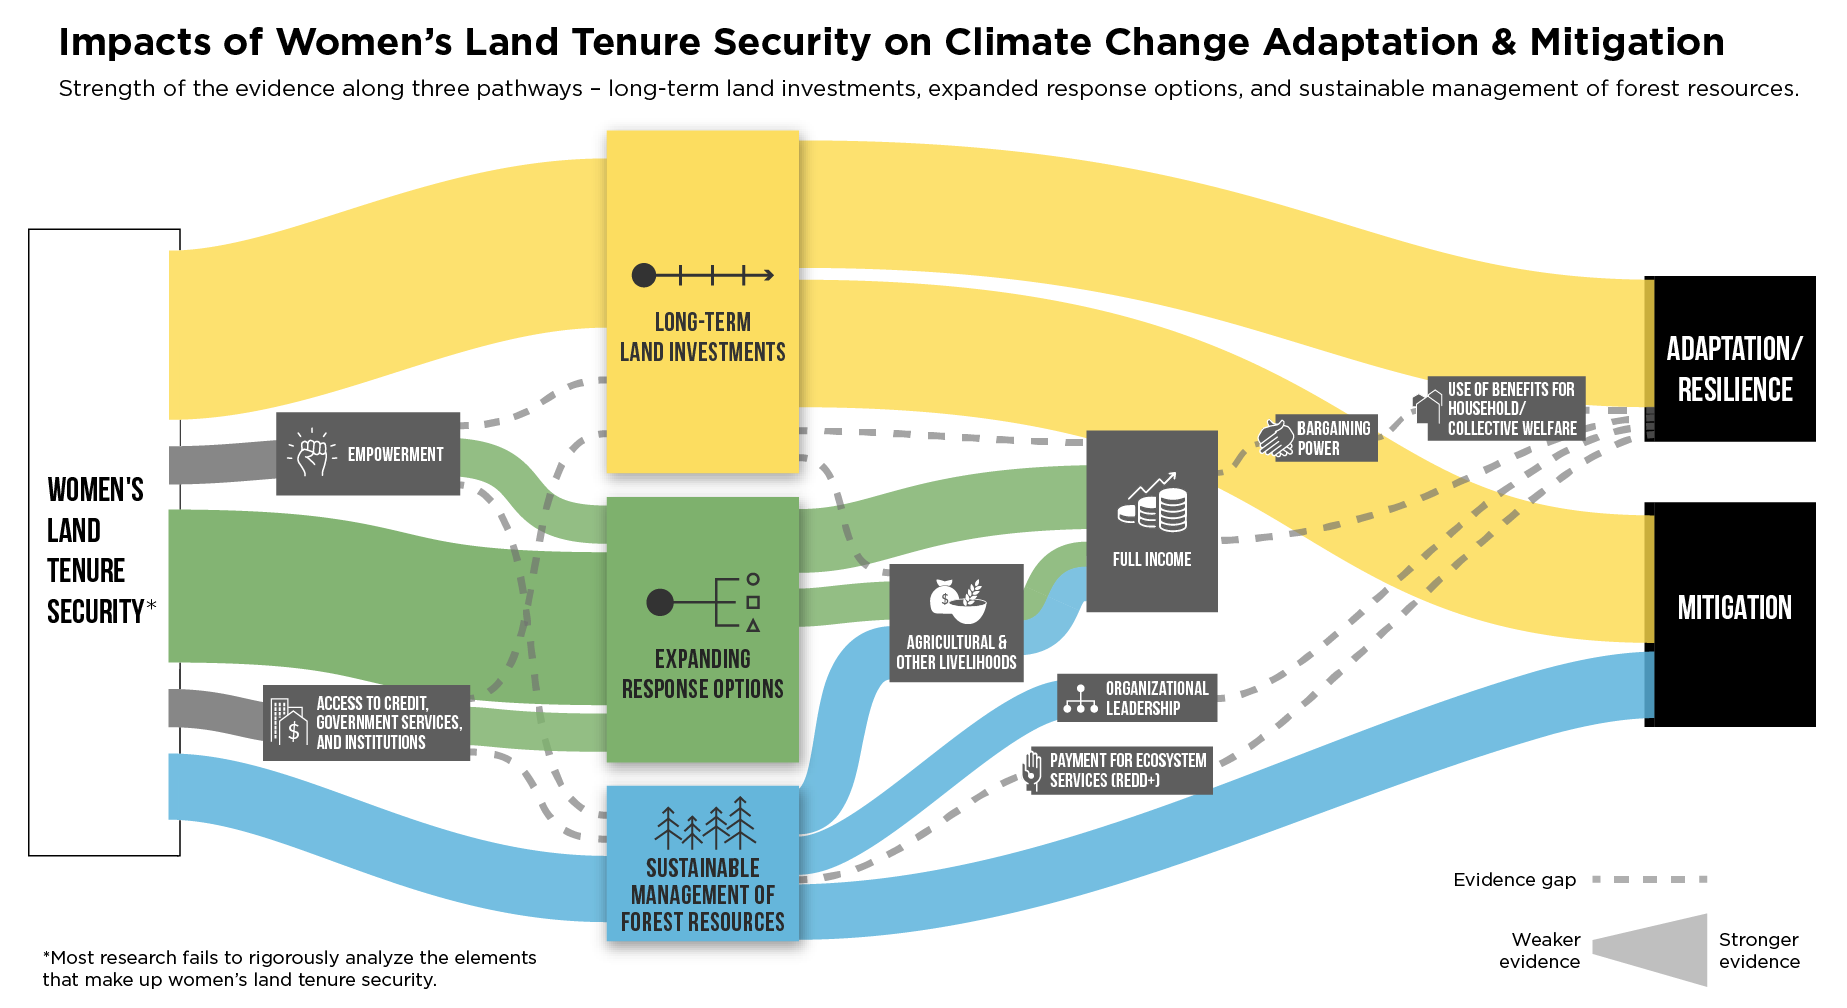 Featured image for “Women’s Land Tenure Security as a Pathway to Climate Change Mitigation and Adaptation”